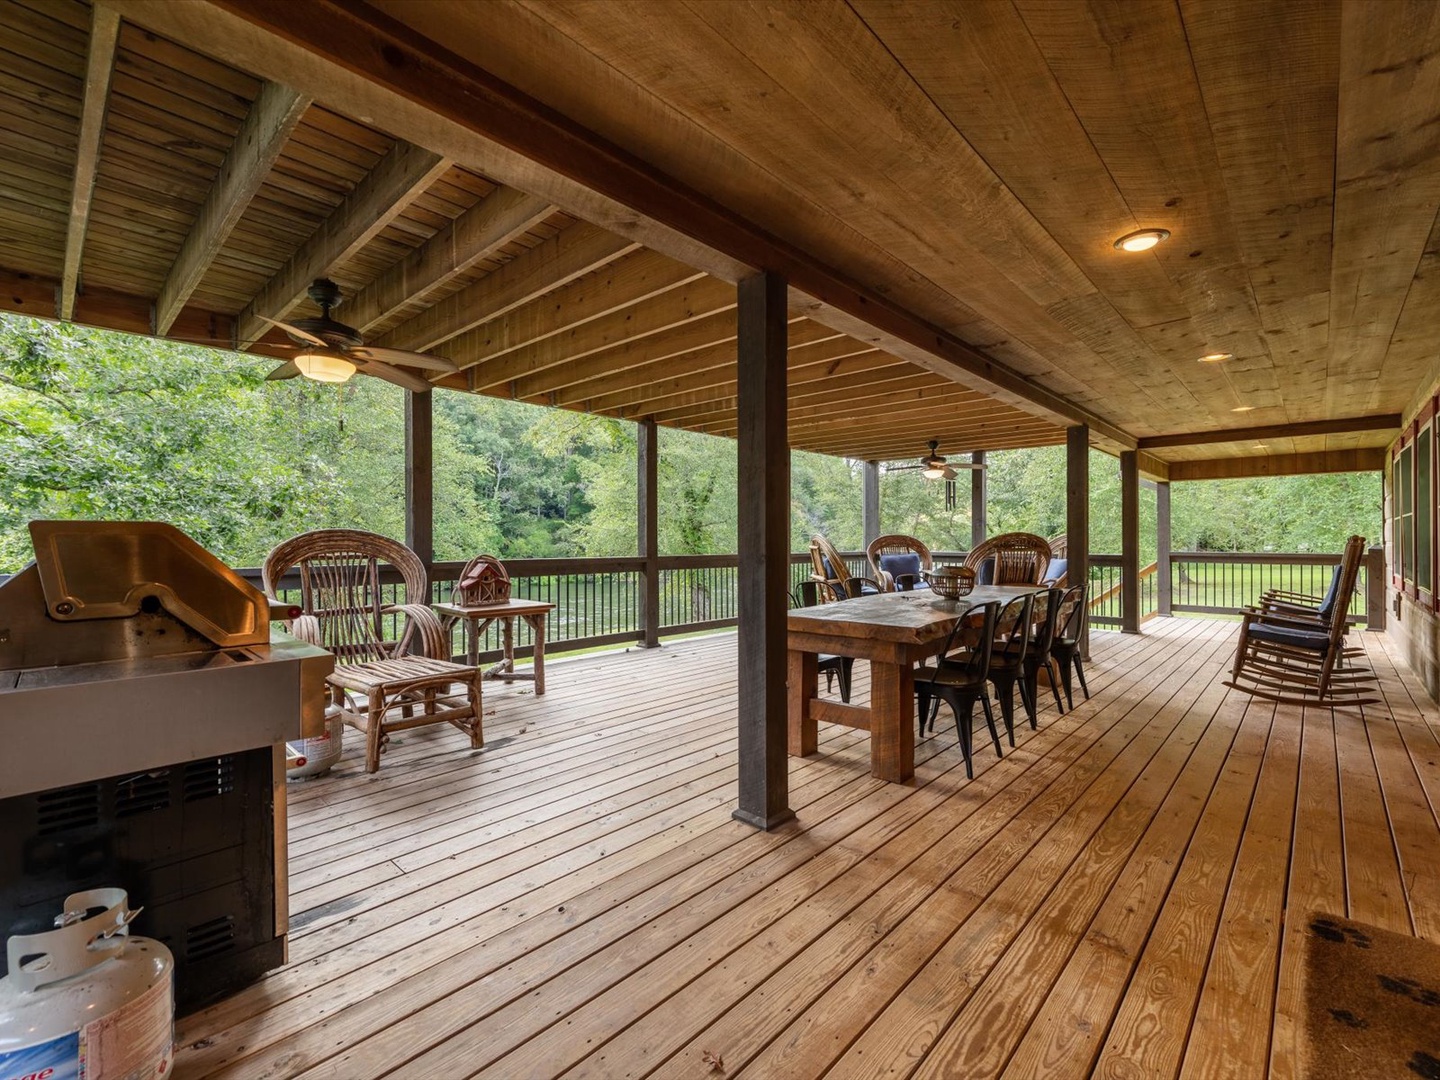 The River House - Entry Level Deck Dining Area